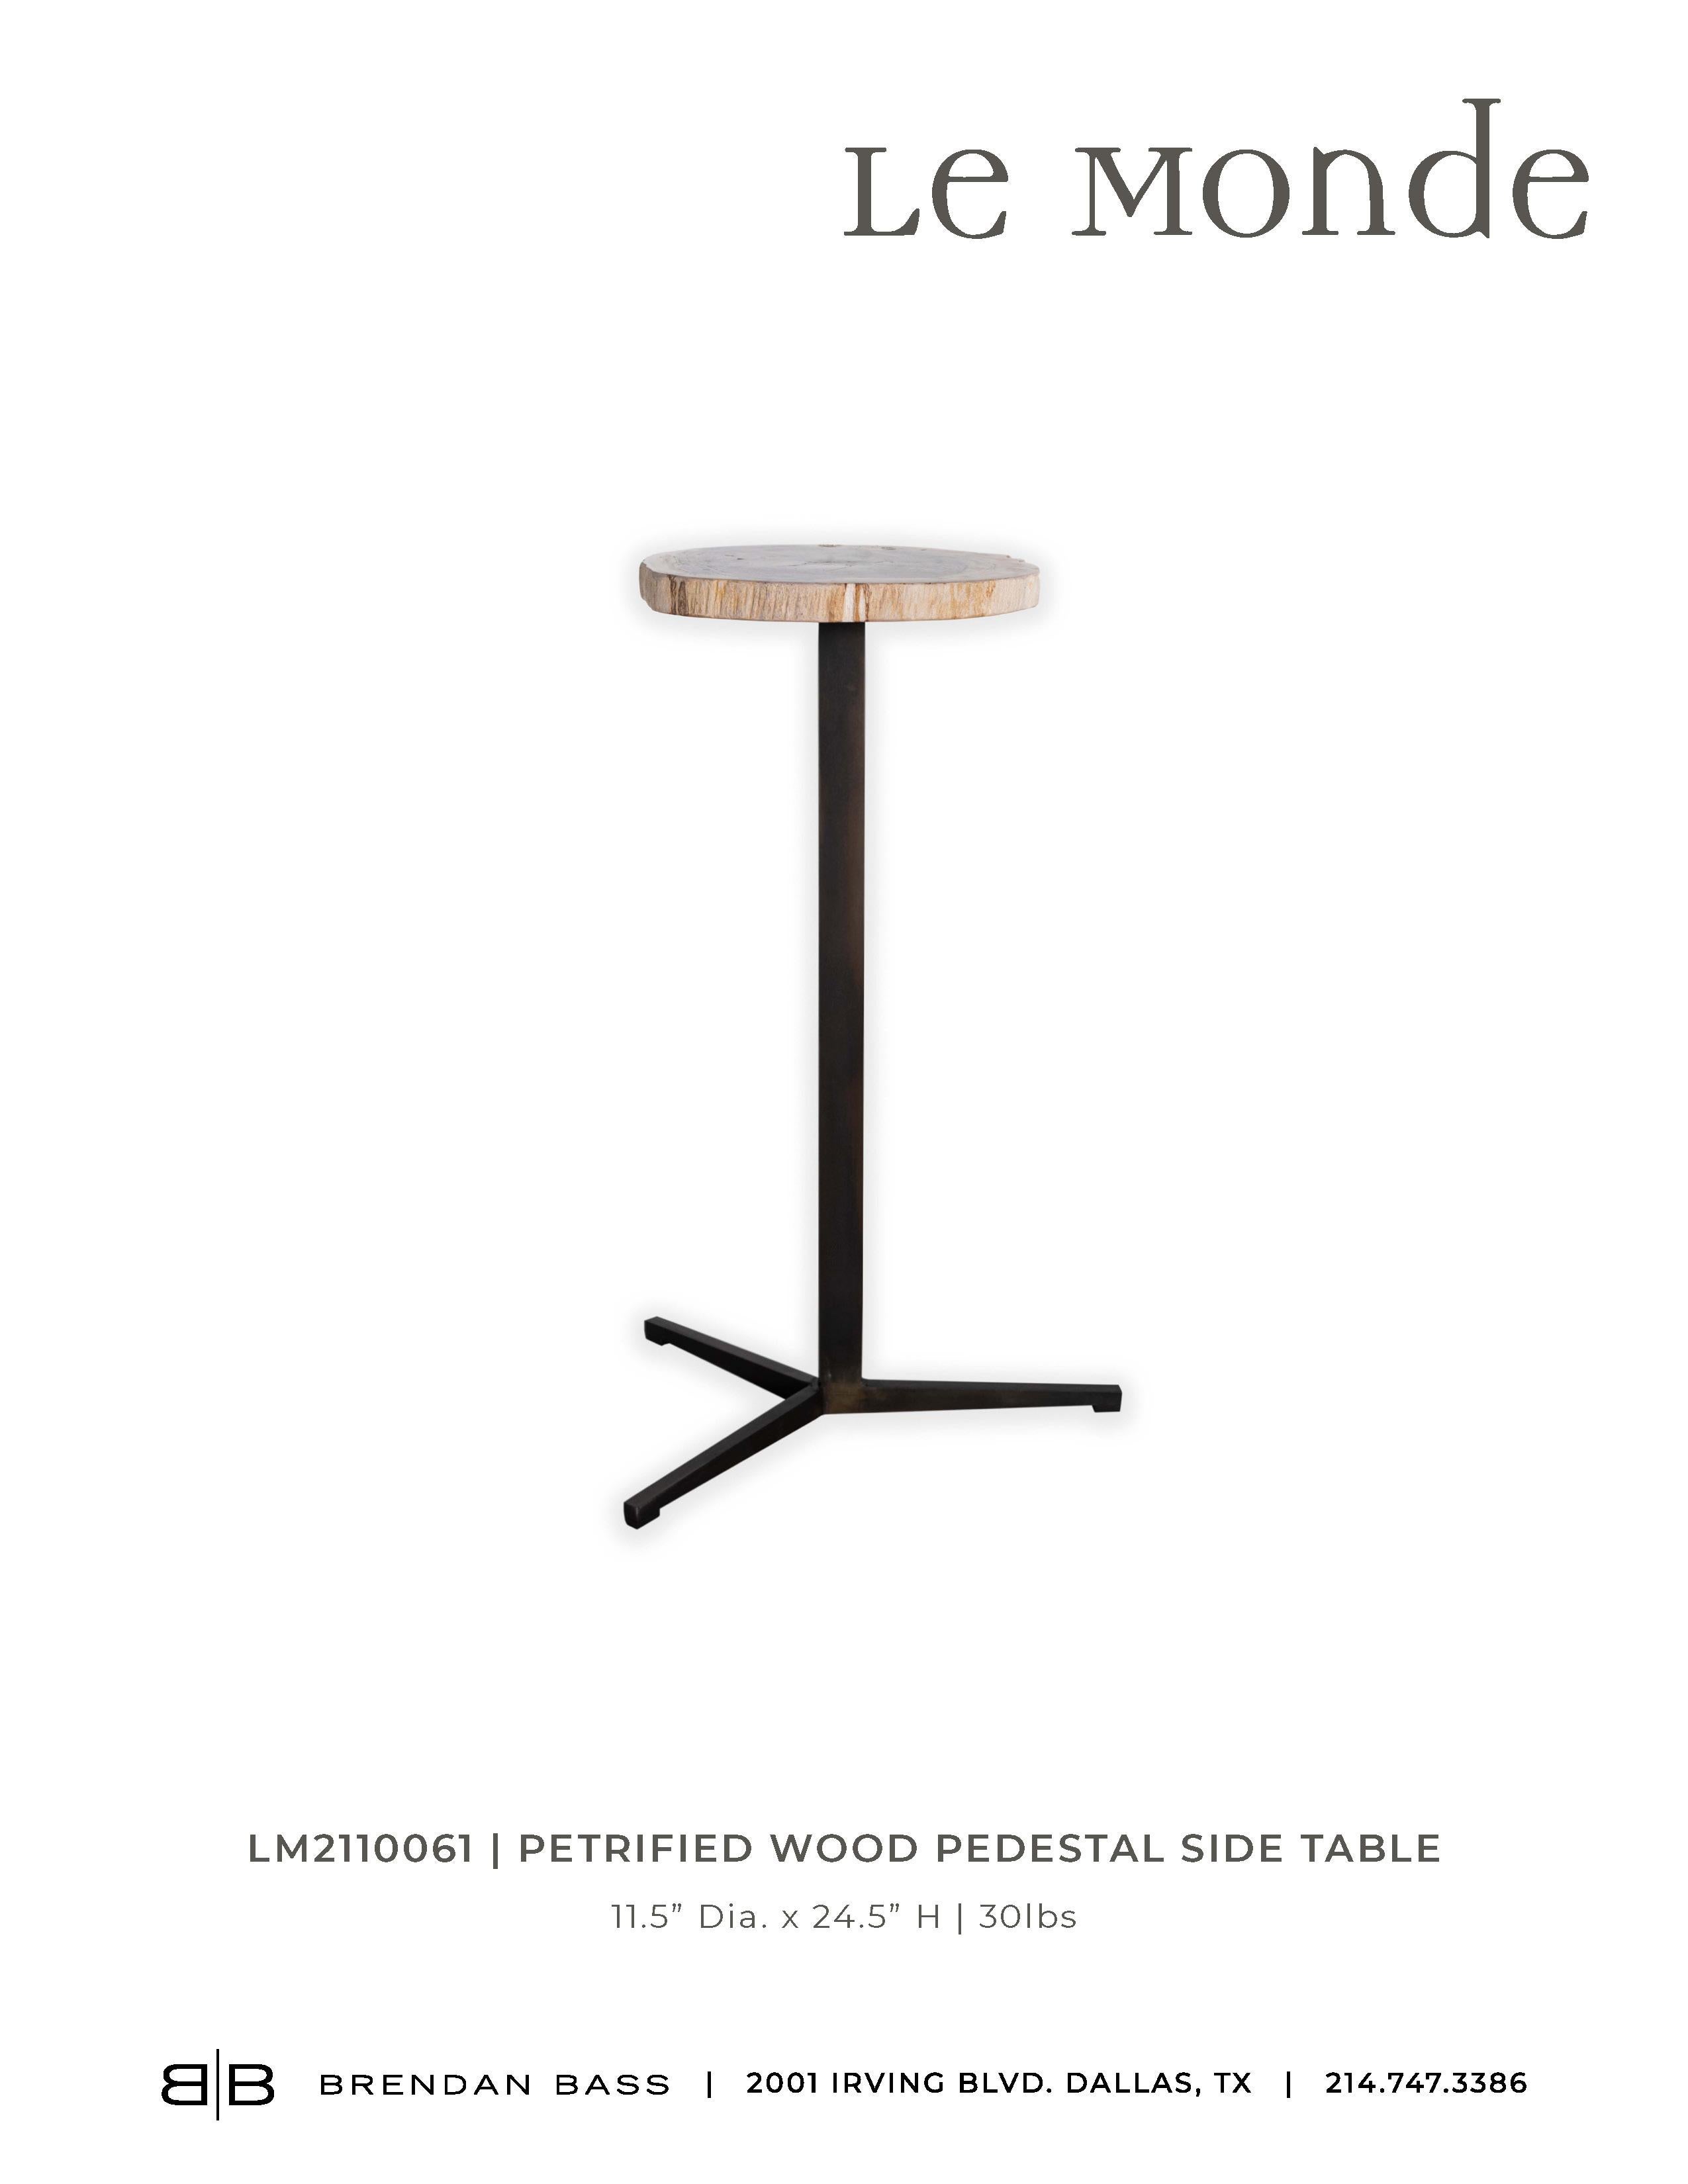 Contemporary Petrified Wood Pedestal Side Table